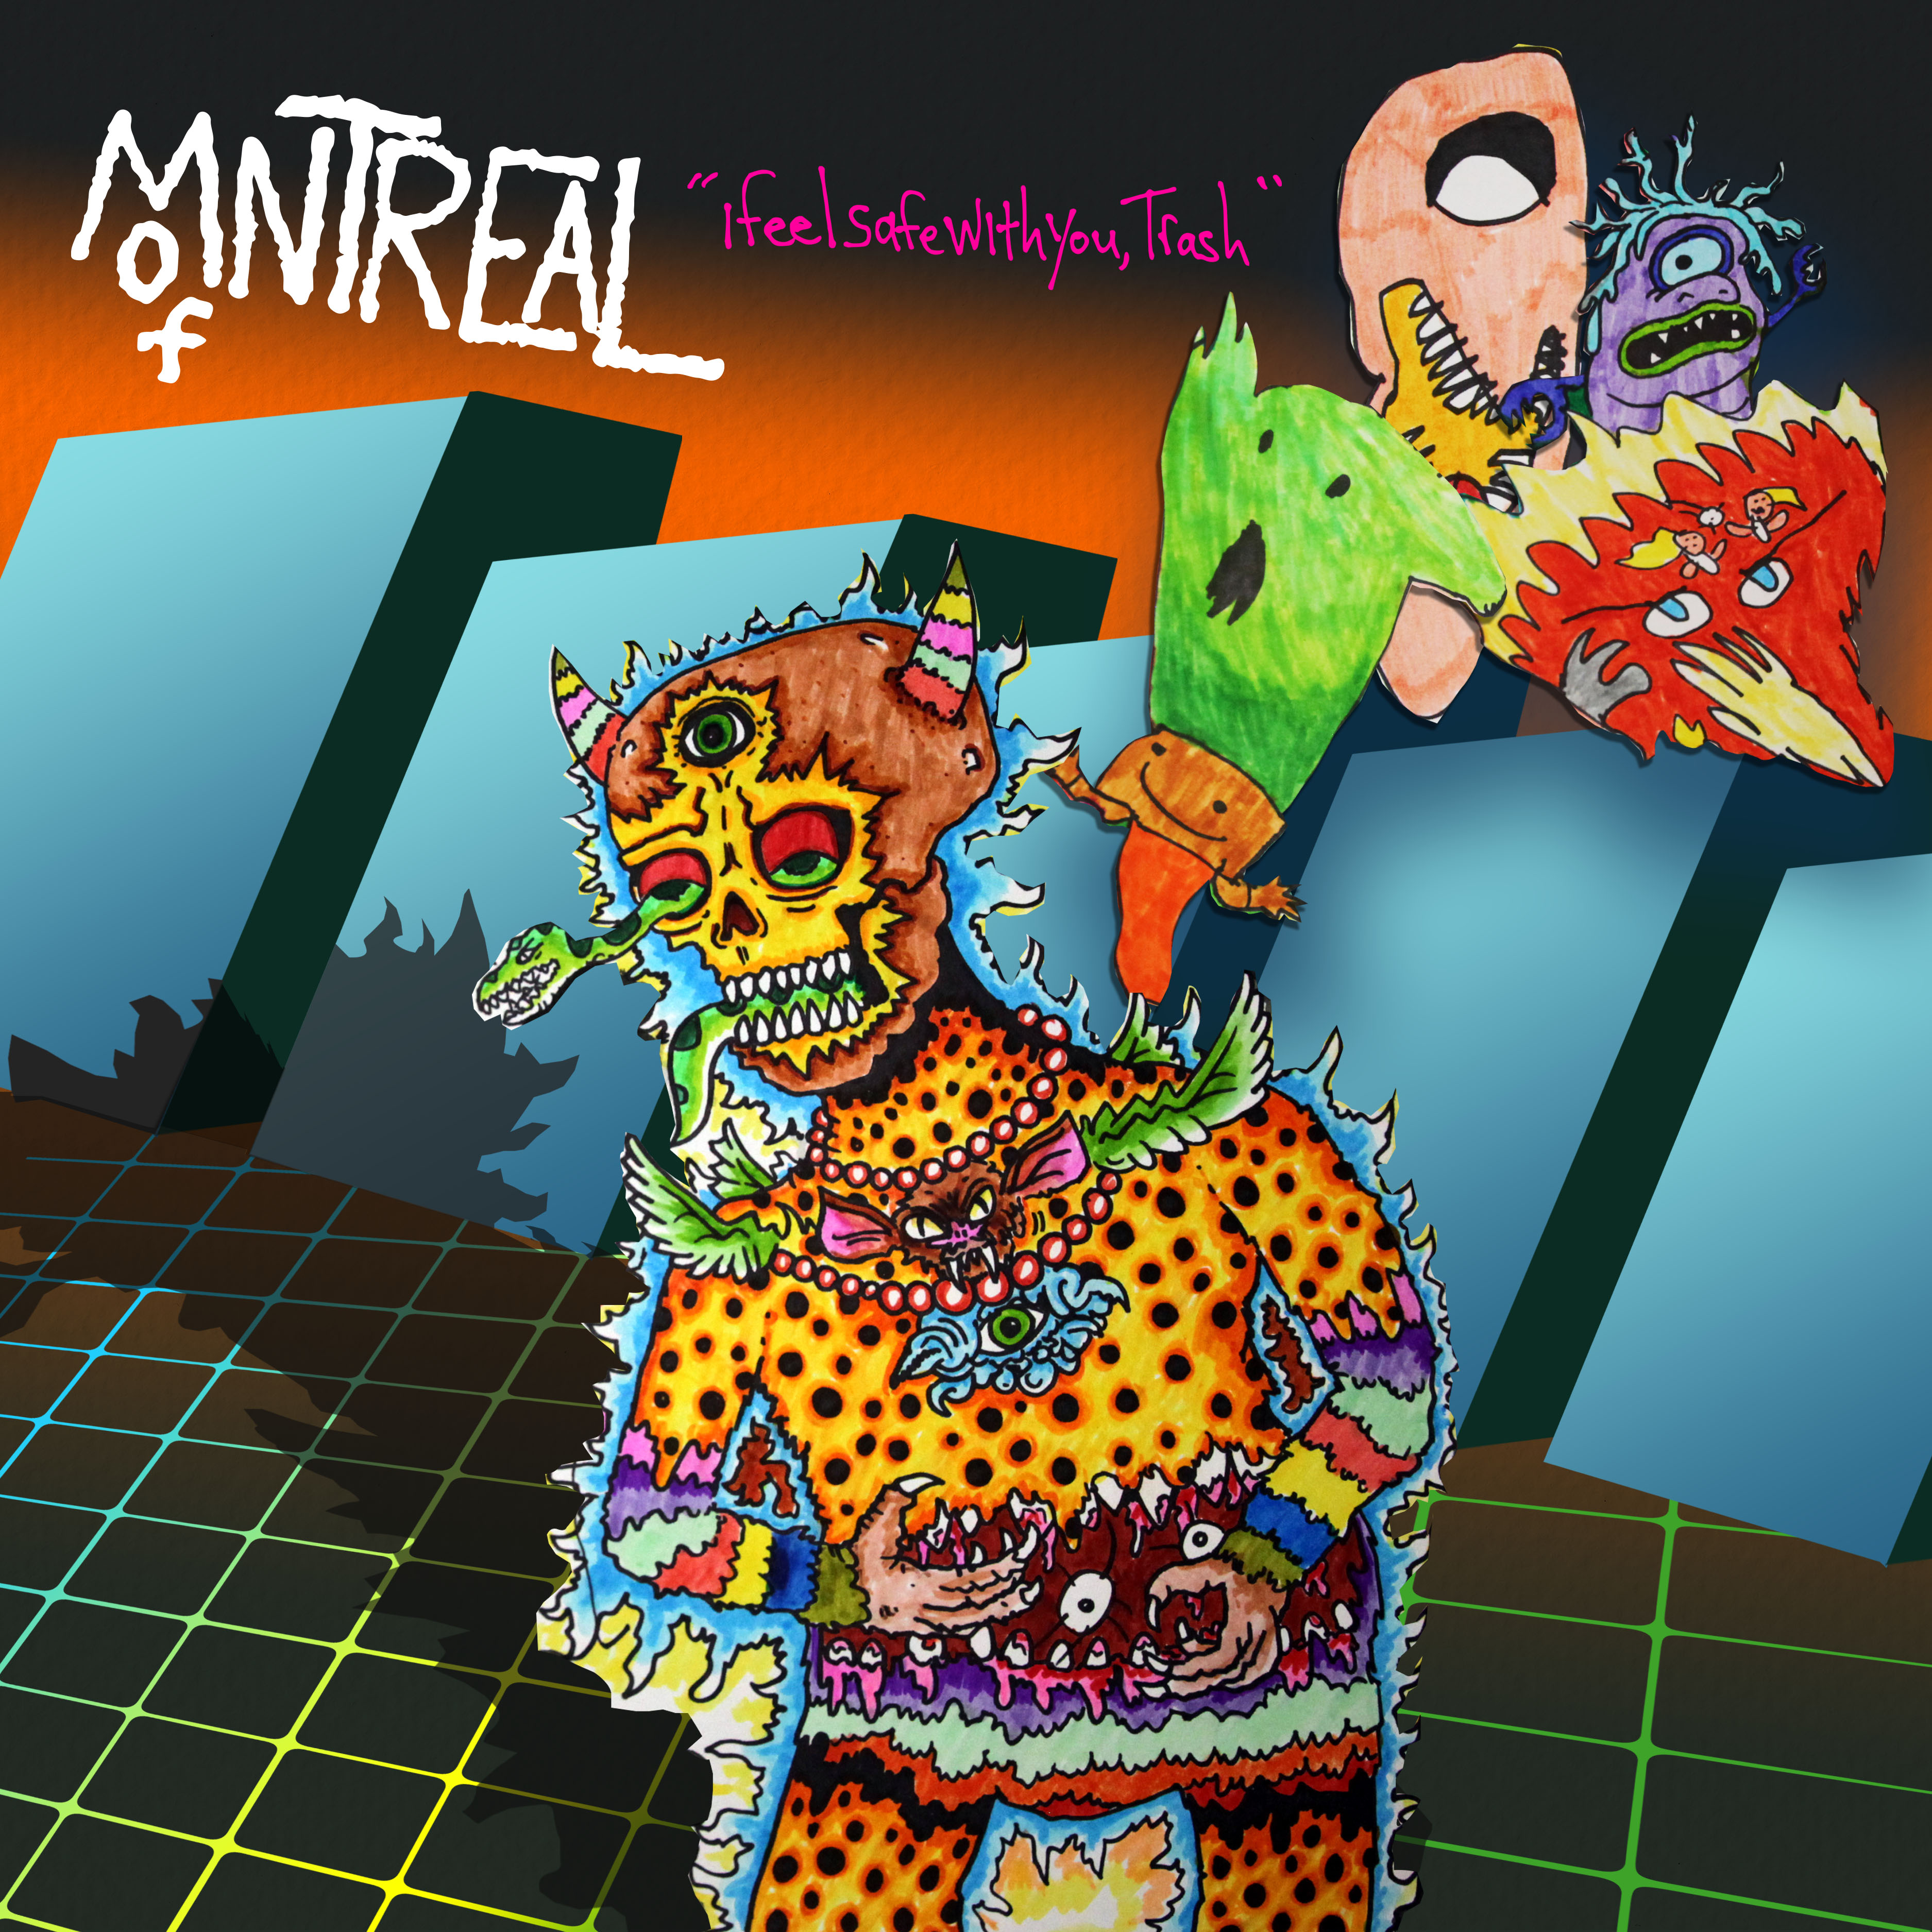 of Montreal – I Feel Safe With You, Trash (2021) [FLAC 24bit/96kHz]